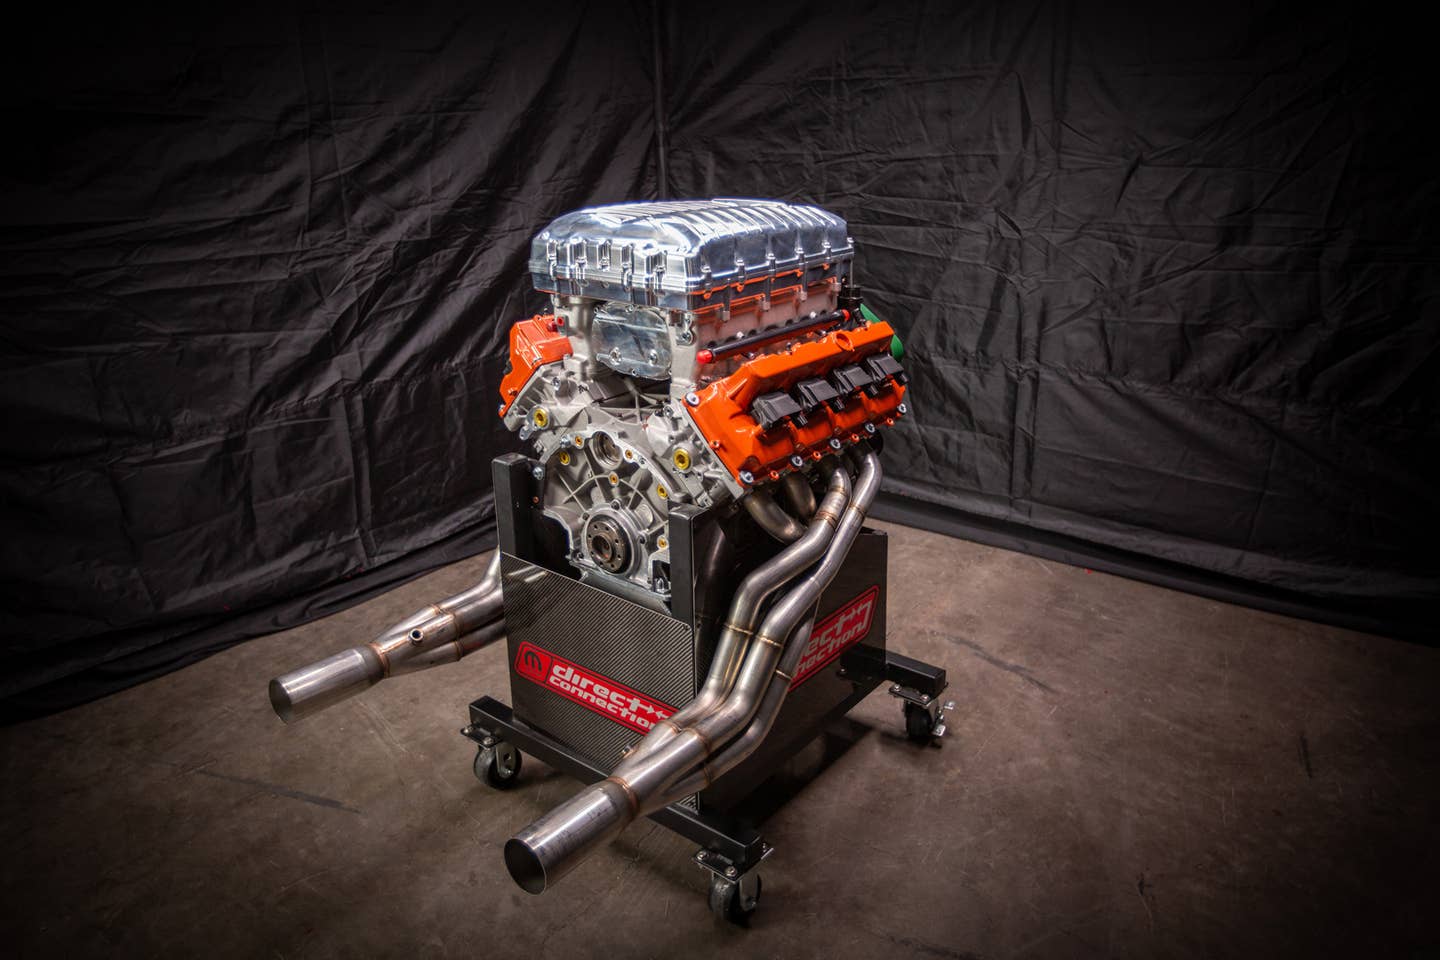 The latest evolution of the engine that won the 2018 NHRA Factory Stock Showdown and NMCA Factory Super Car championships, the 354 Supercharged HEMI® Drag Pak engine features numerous upgrades.